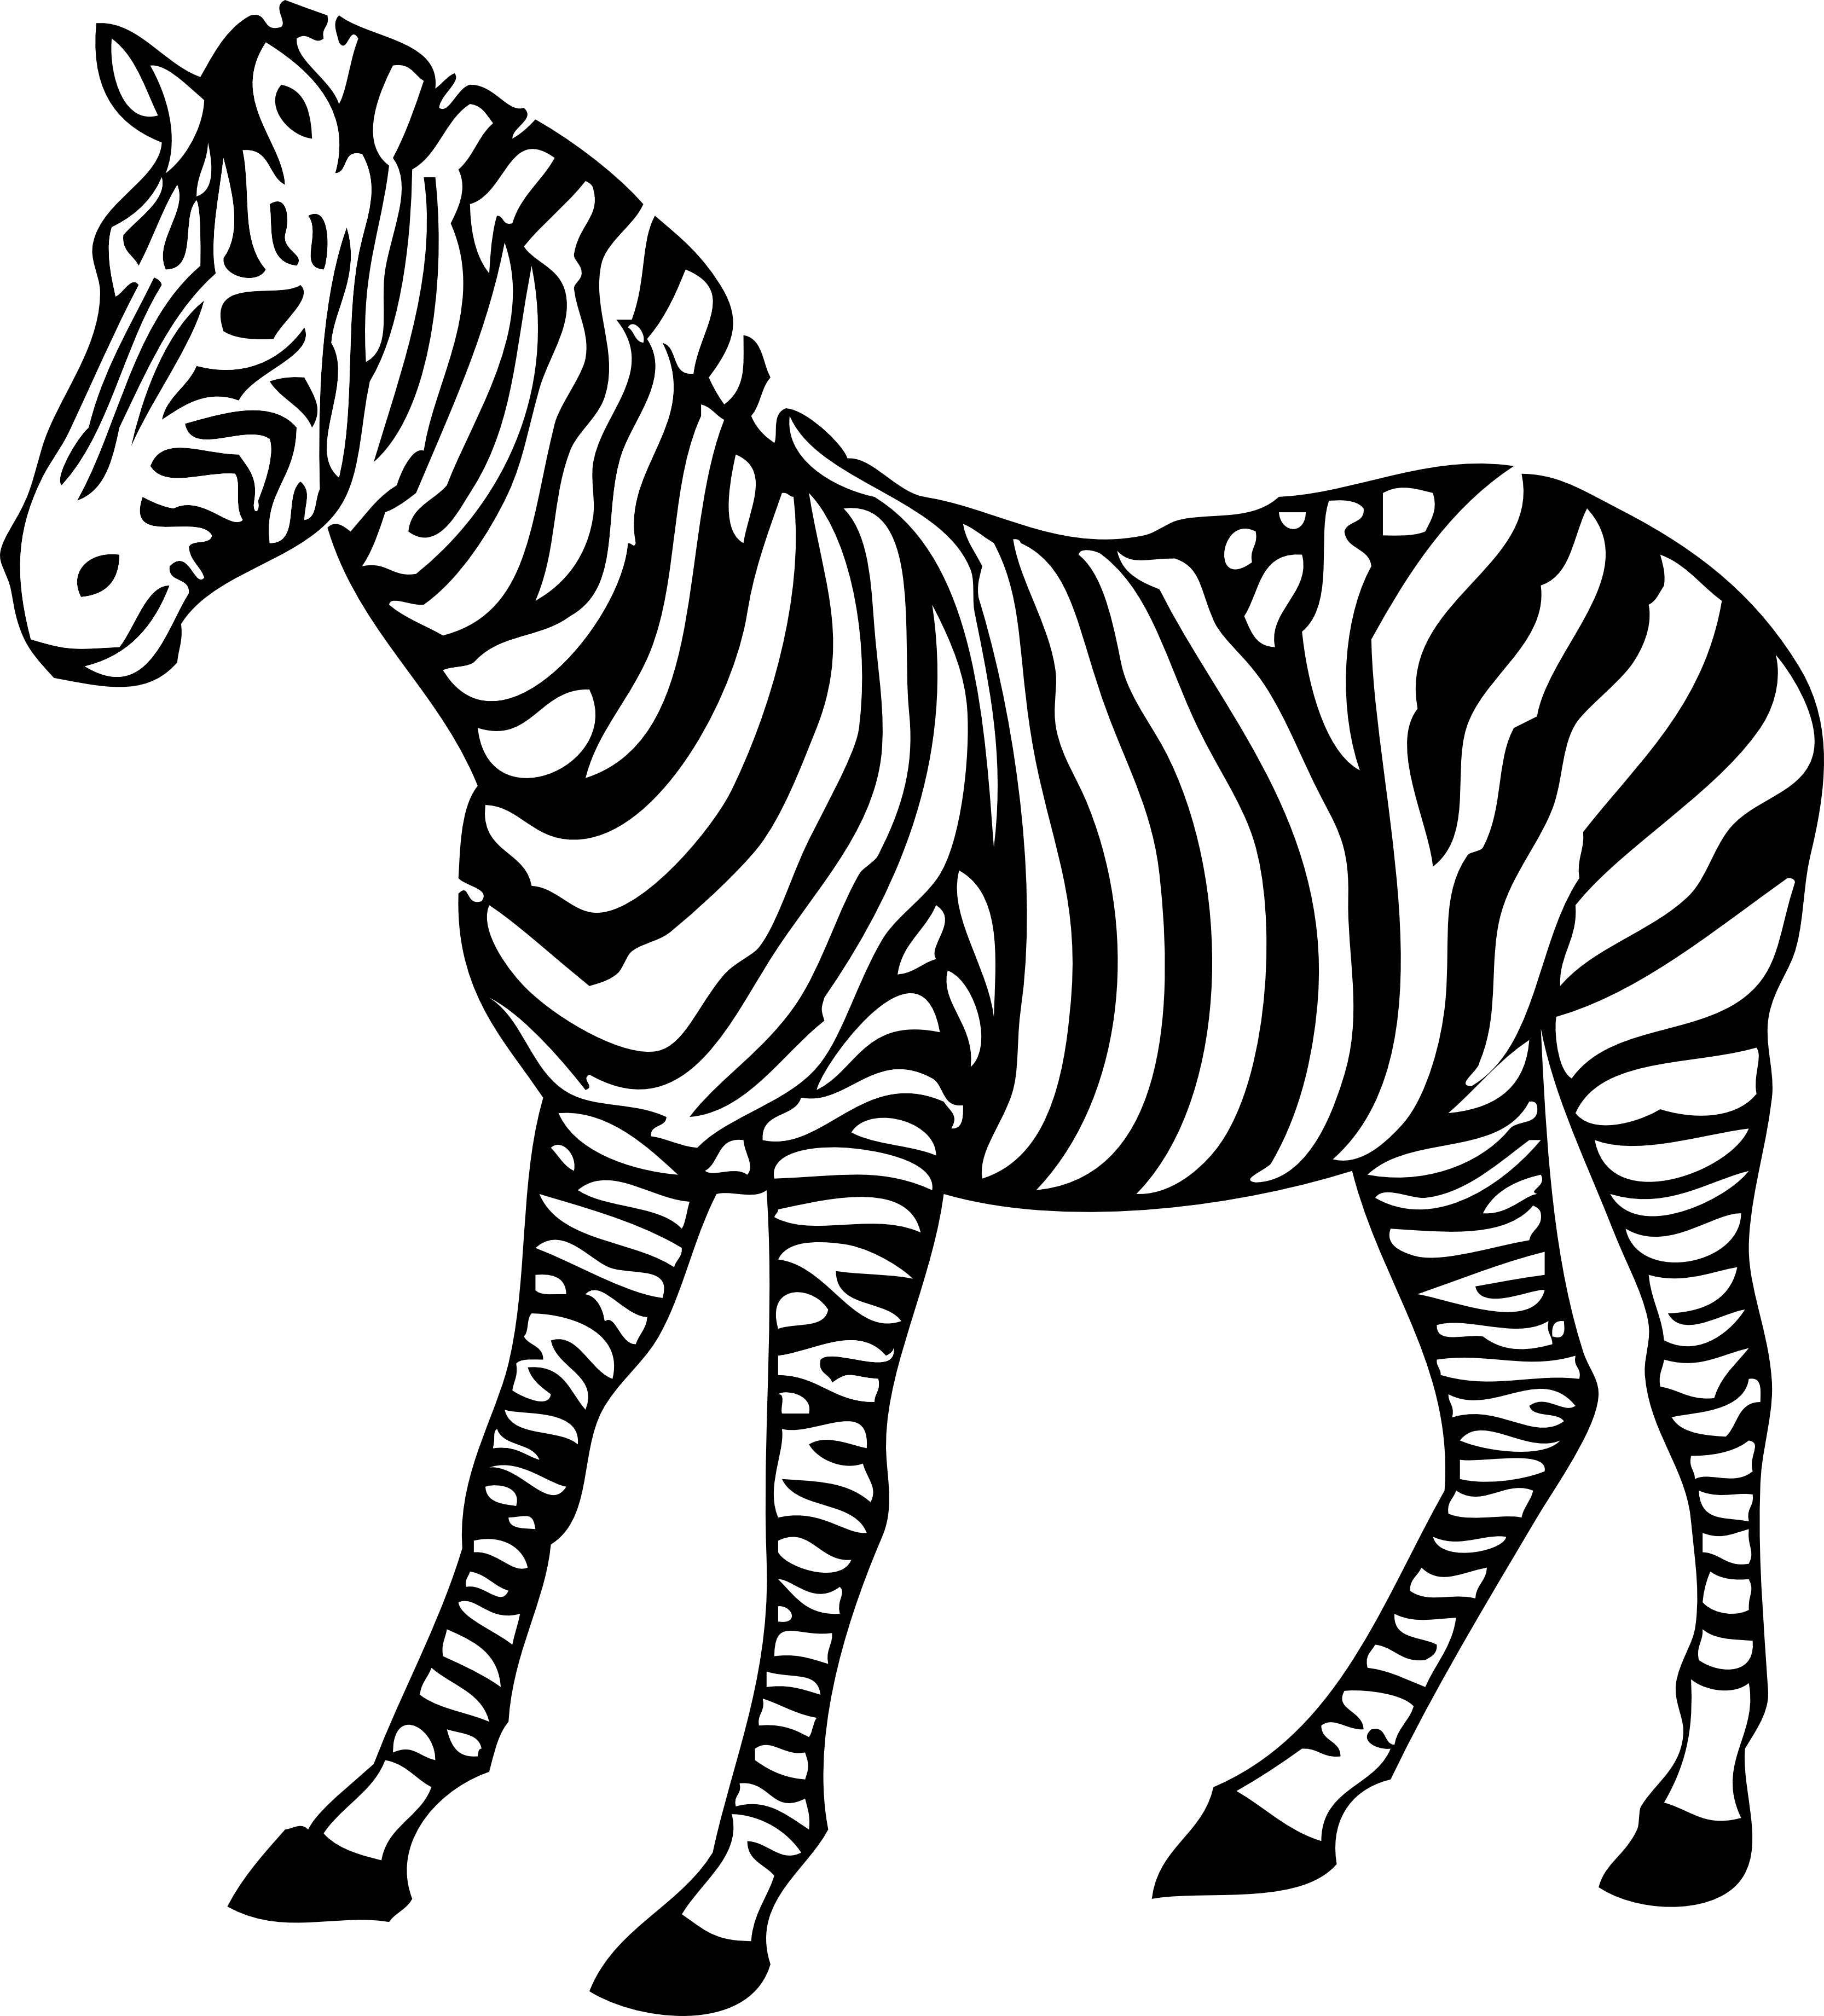 zebra png image collection for download crazypngm crazy png images download #29637